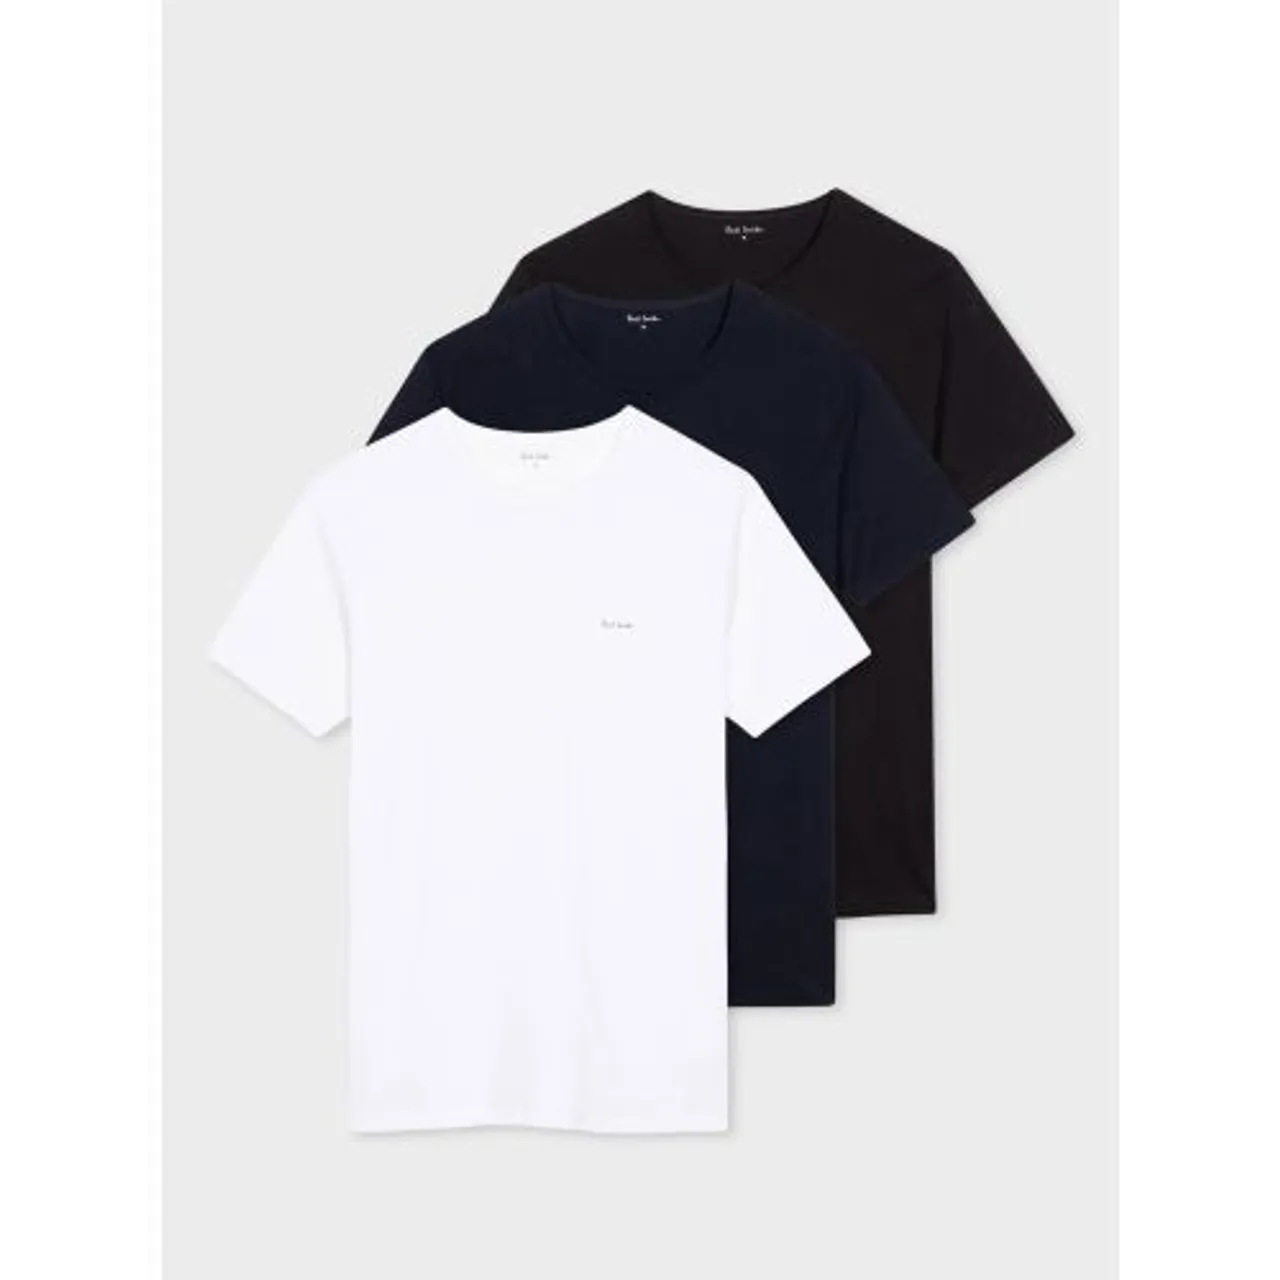 Paul Smith Mens Assorted 3-Pack T-Shirt